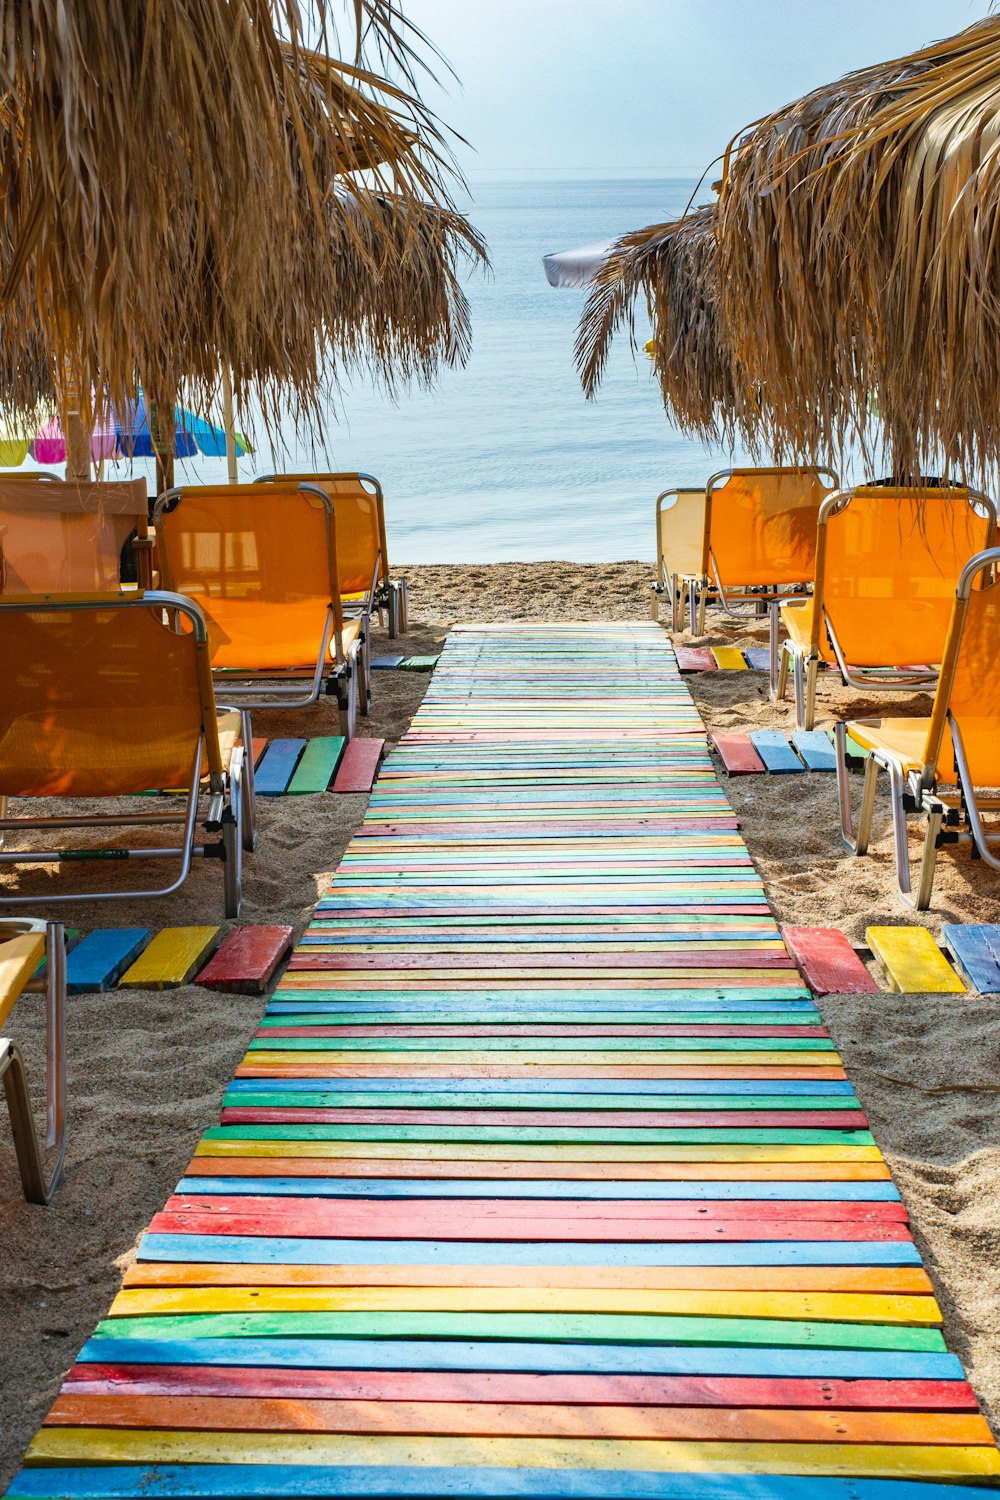 a colorful carpet on the beach with chairs and umbrellas